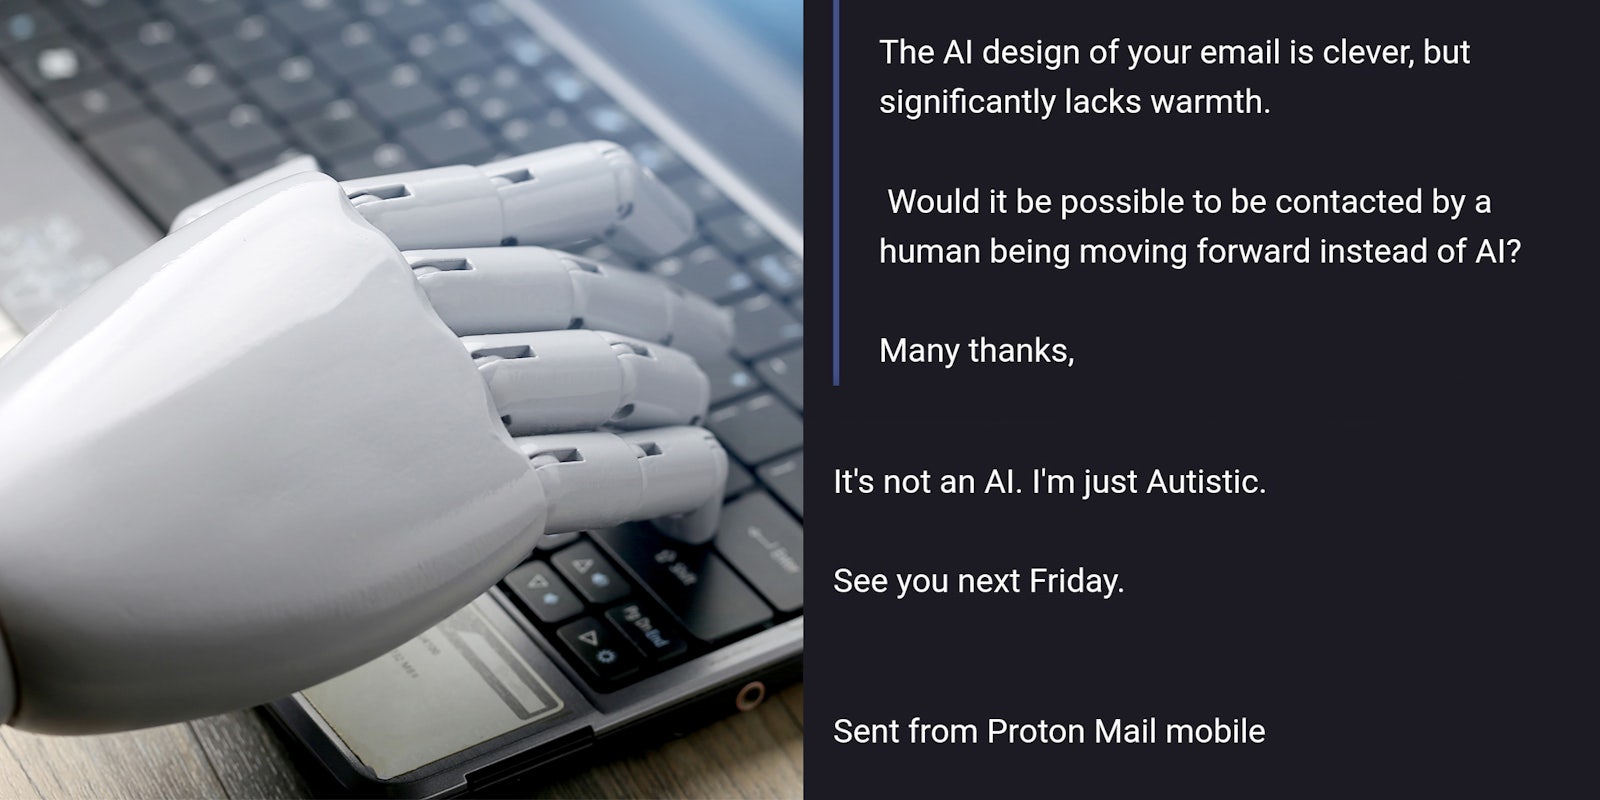 AI typing on laptop keyboard (l) email exchange on grey background 'The AI design of your email is clever, but significantly lacks warmth. Would it be possible to be contacted by a human being moving forward instead of AI? Many thanks, It's not an AI. I'm just Autistic. See you next Friday. Sent from Proton Mail mobile' (r)